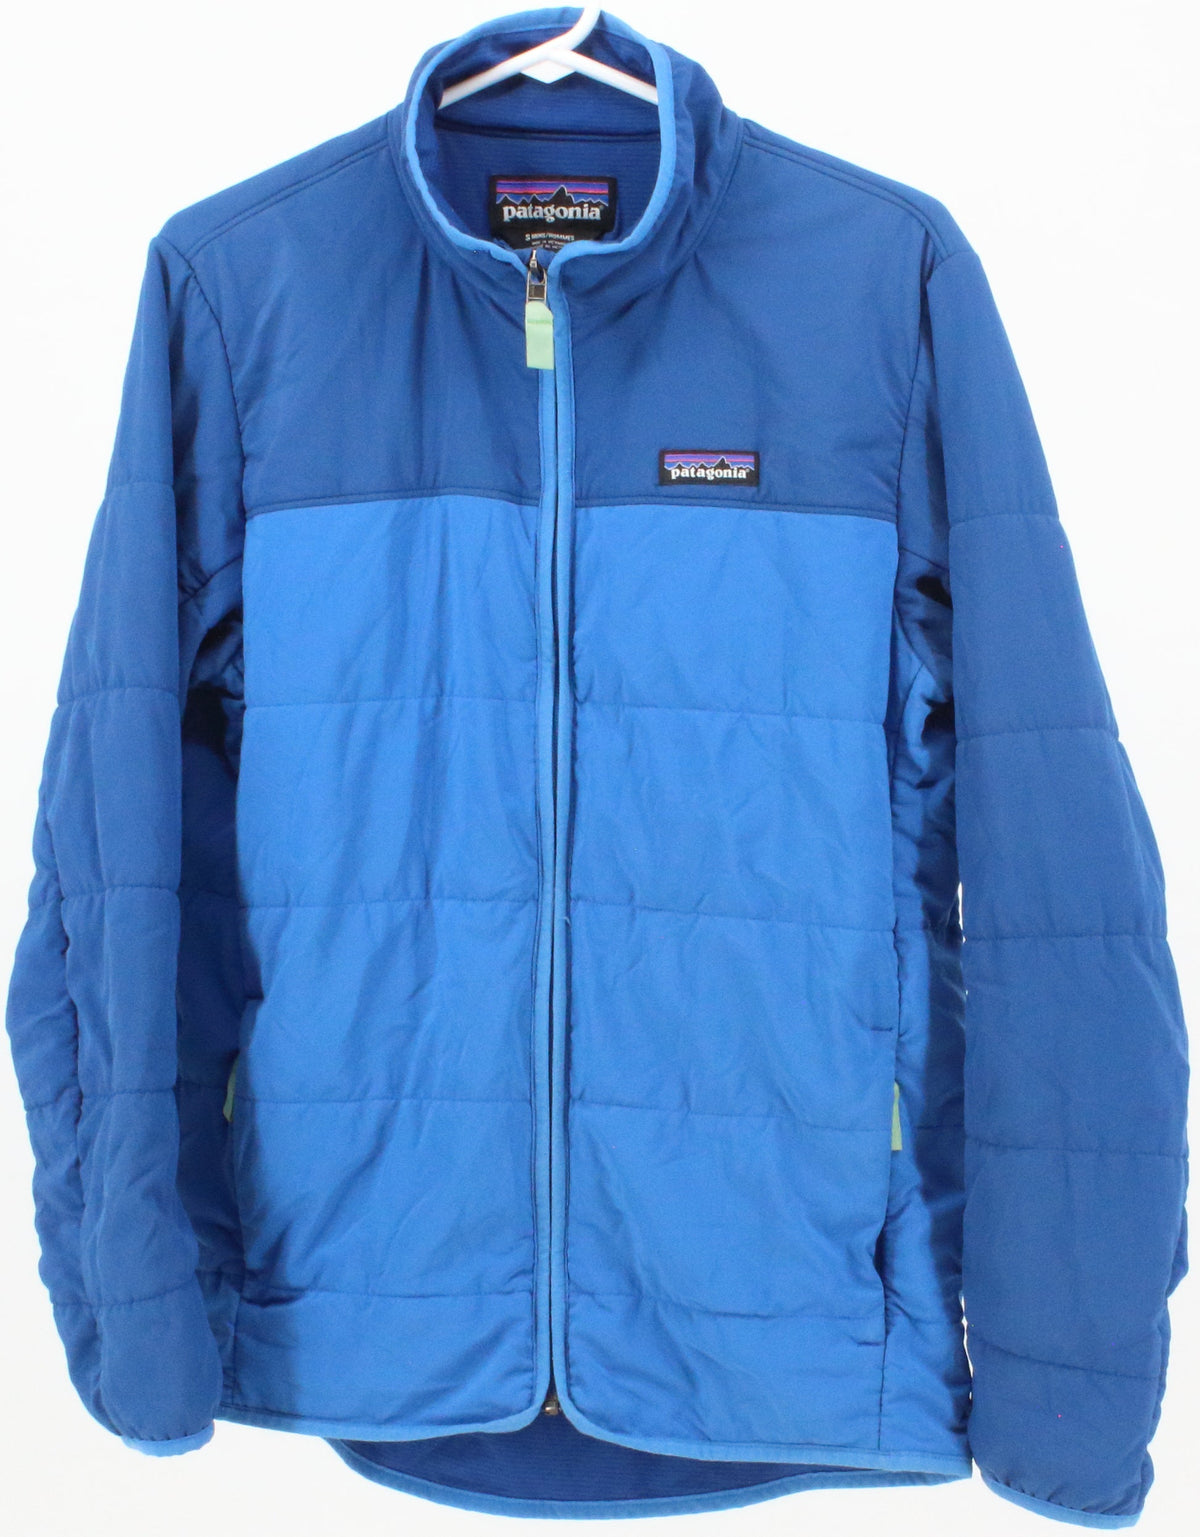 Patagonia Blue Quilted Men's Jacket